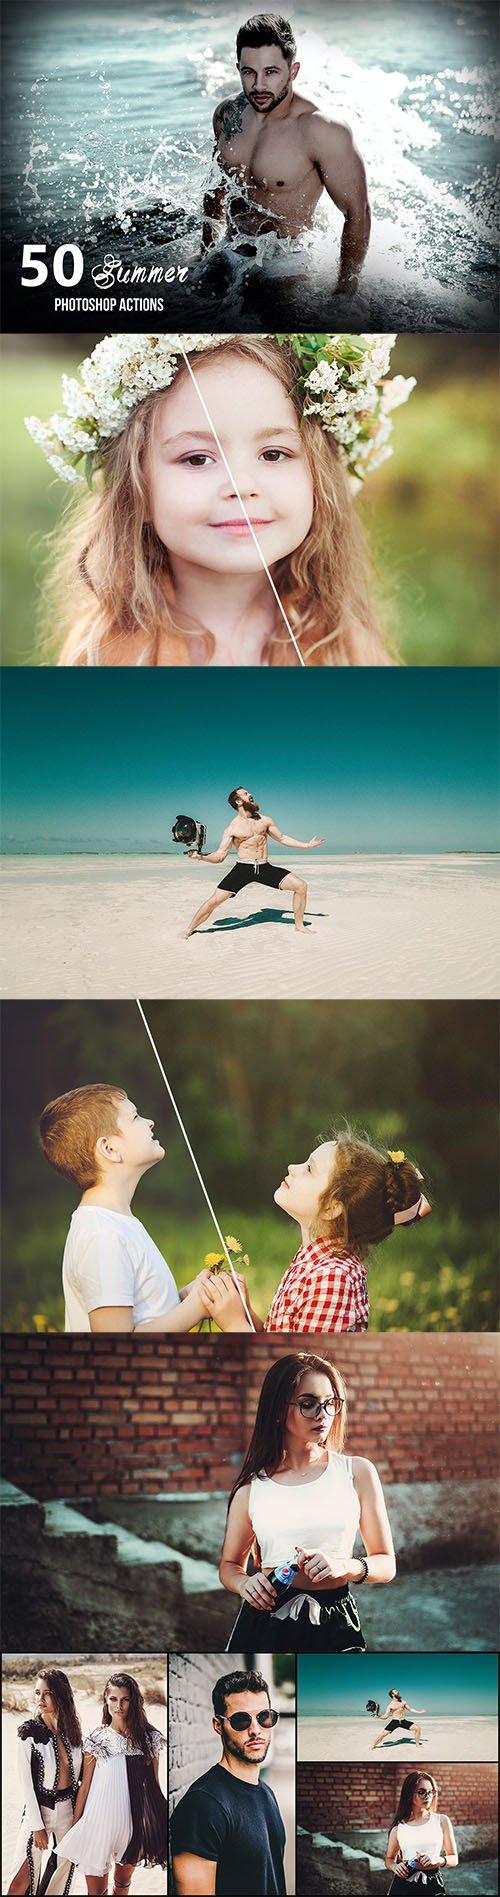 50 Summer Photoshop Actions